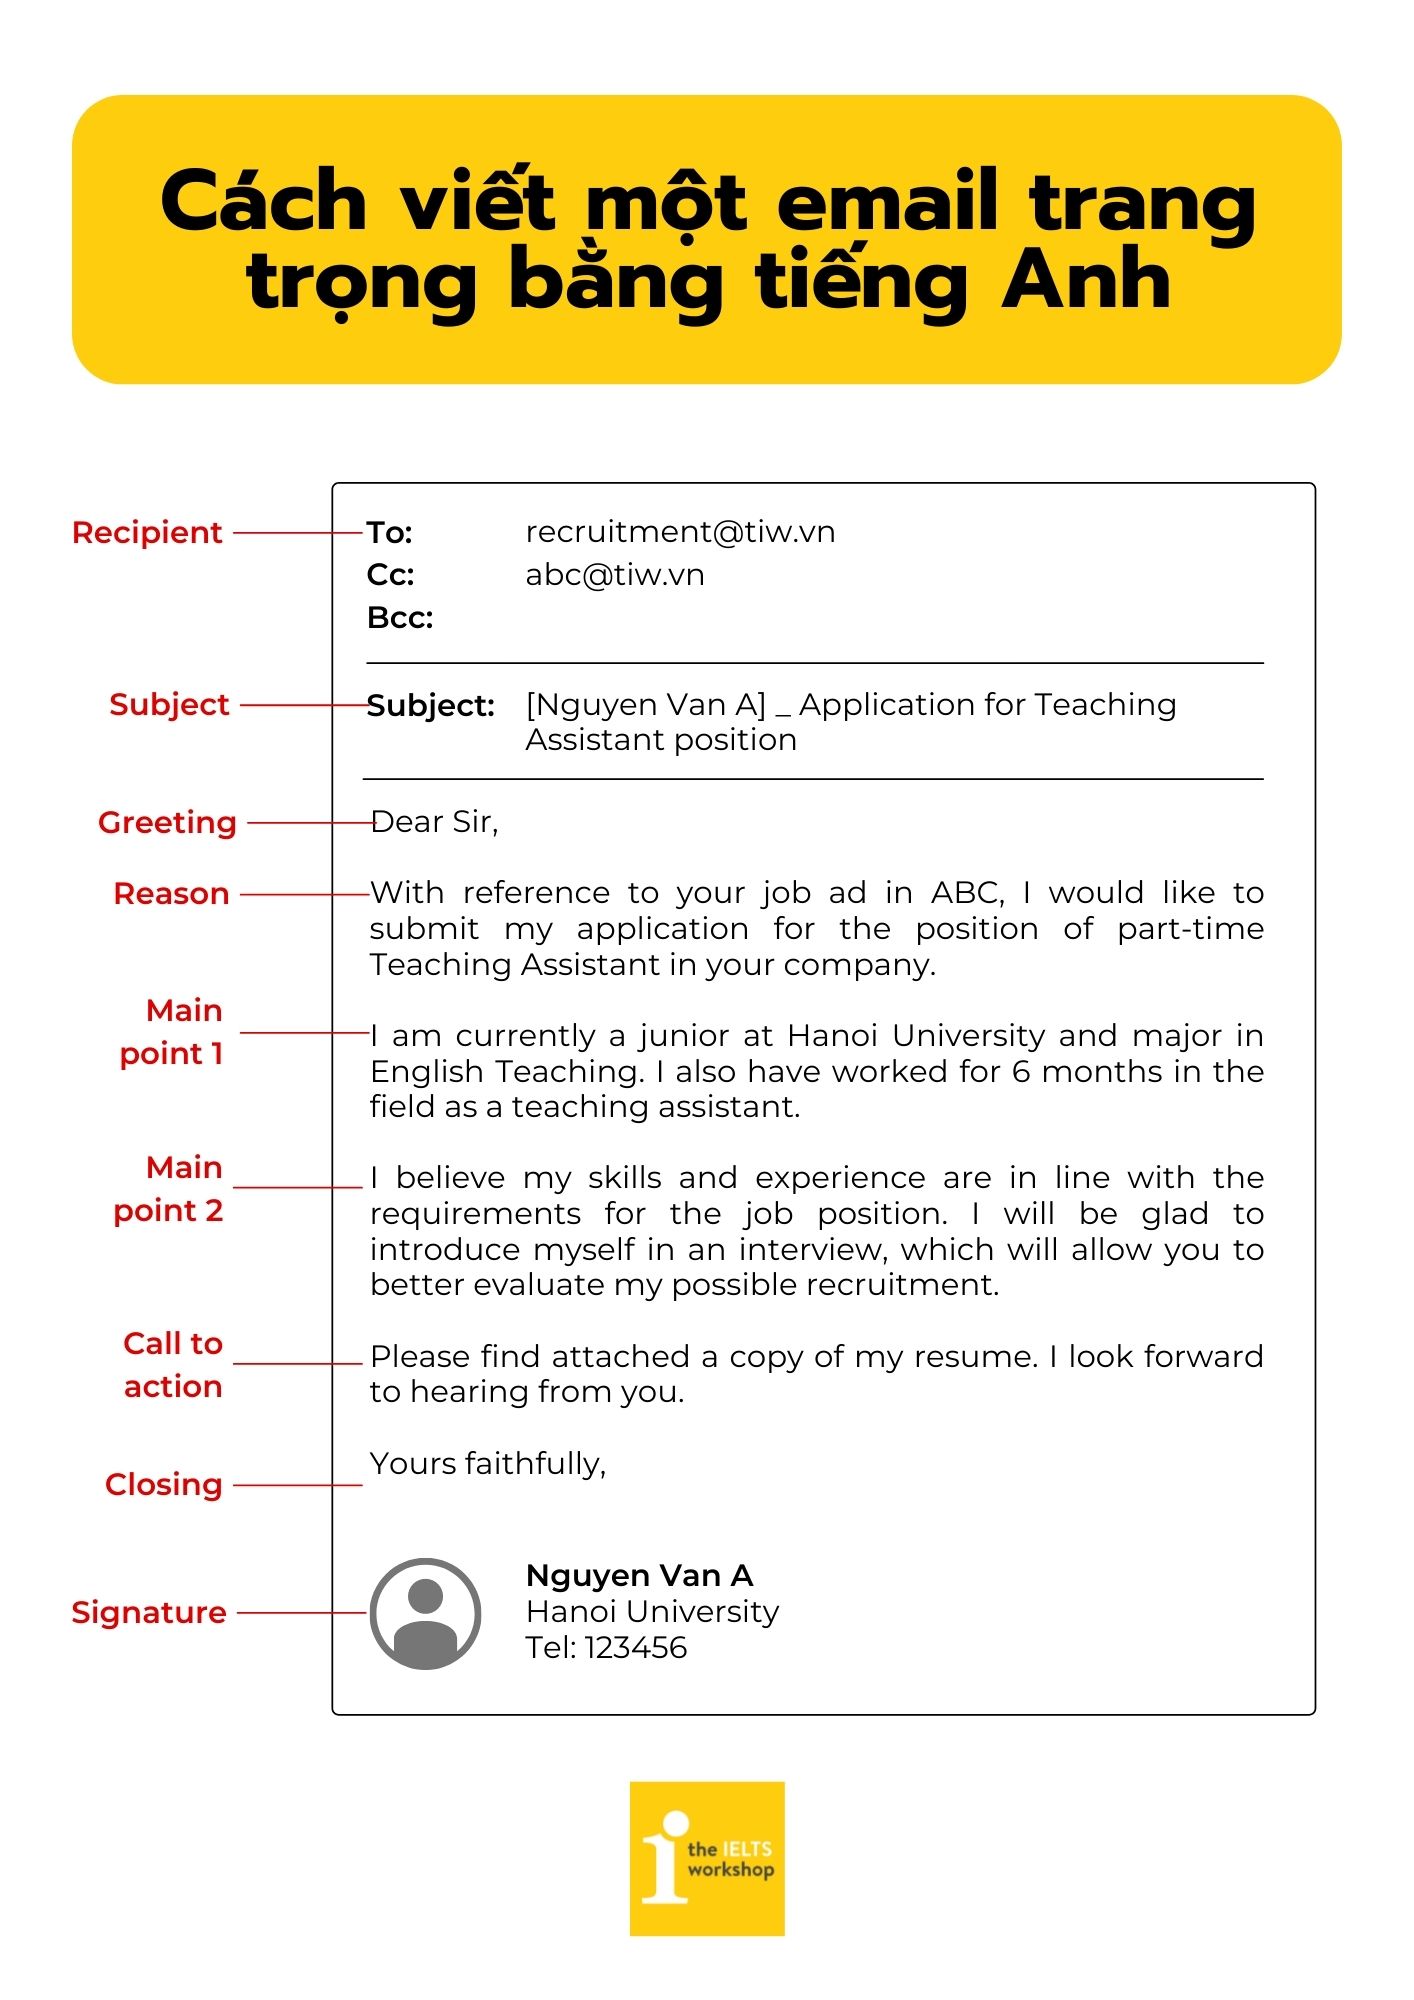 viết email cover letter bằng tiếng anh